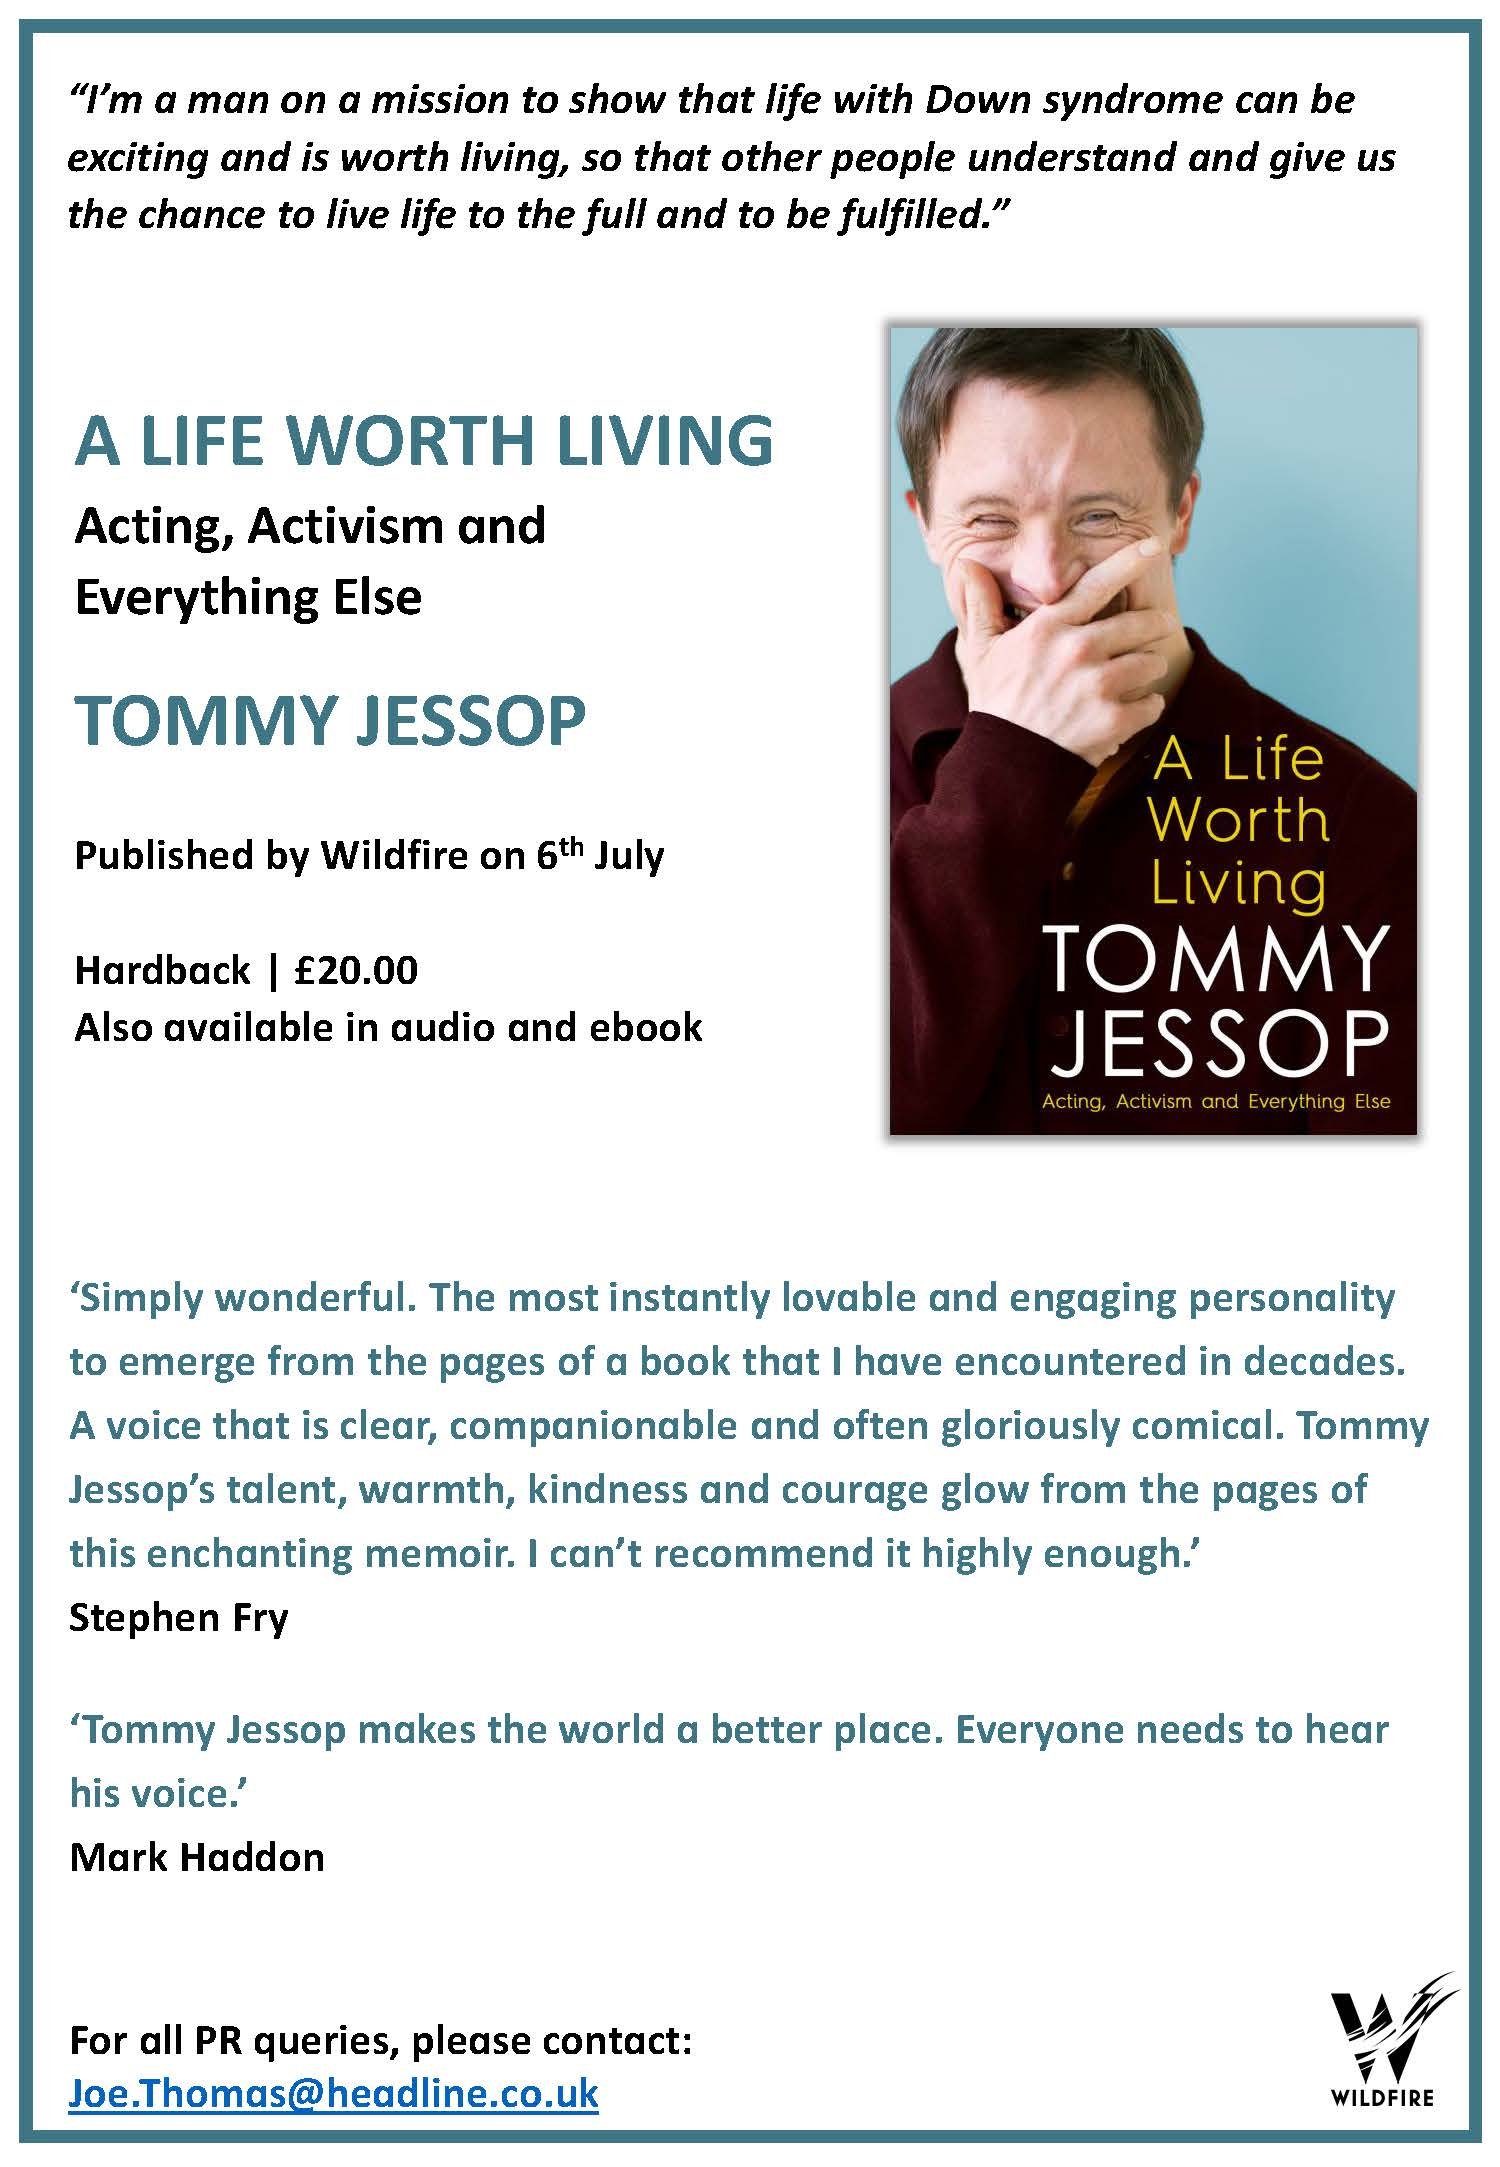 A Life Worth Living by Tommy Jessop PR (002)_Page_1.jpg